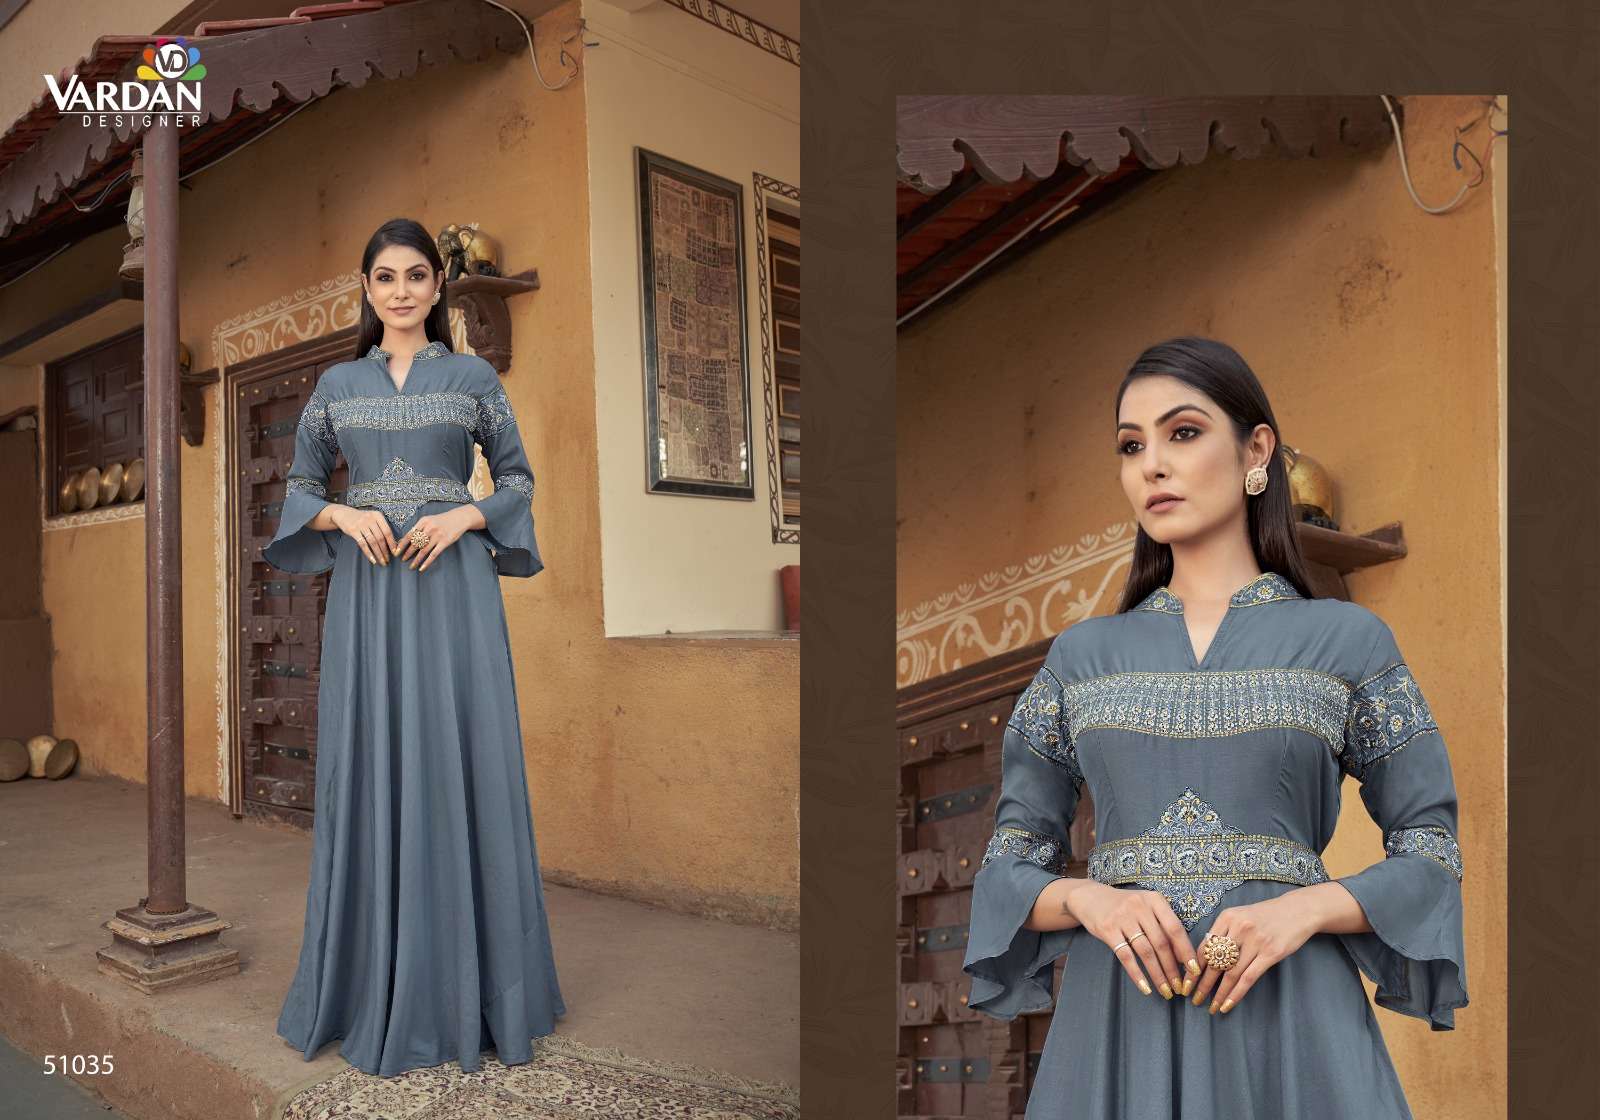 Sugar Vol-2 By Vardan Designer 51034 To 51036 Series Beautiful Stylish Fancy Colorful Casual Wear & Ethnic Wear Heavy Muslin Embroidered Gowns At Wholesale Price